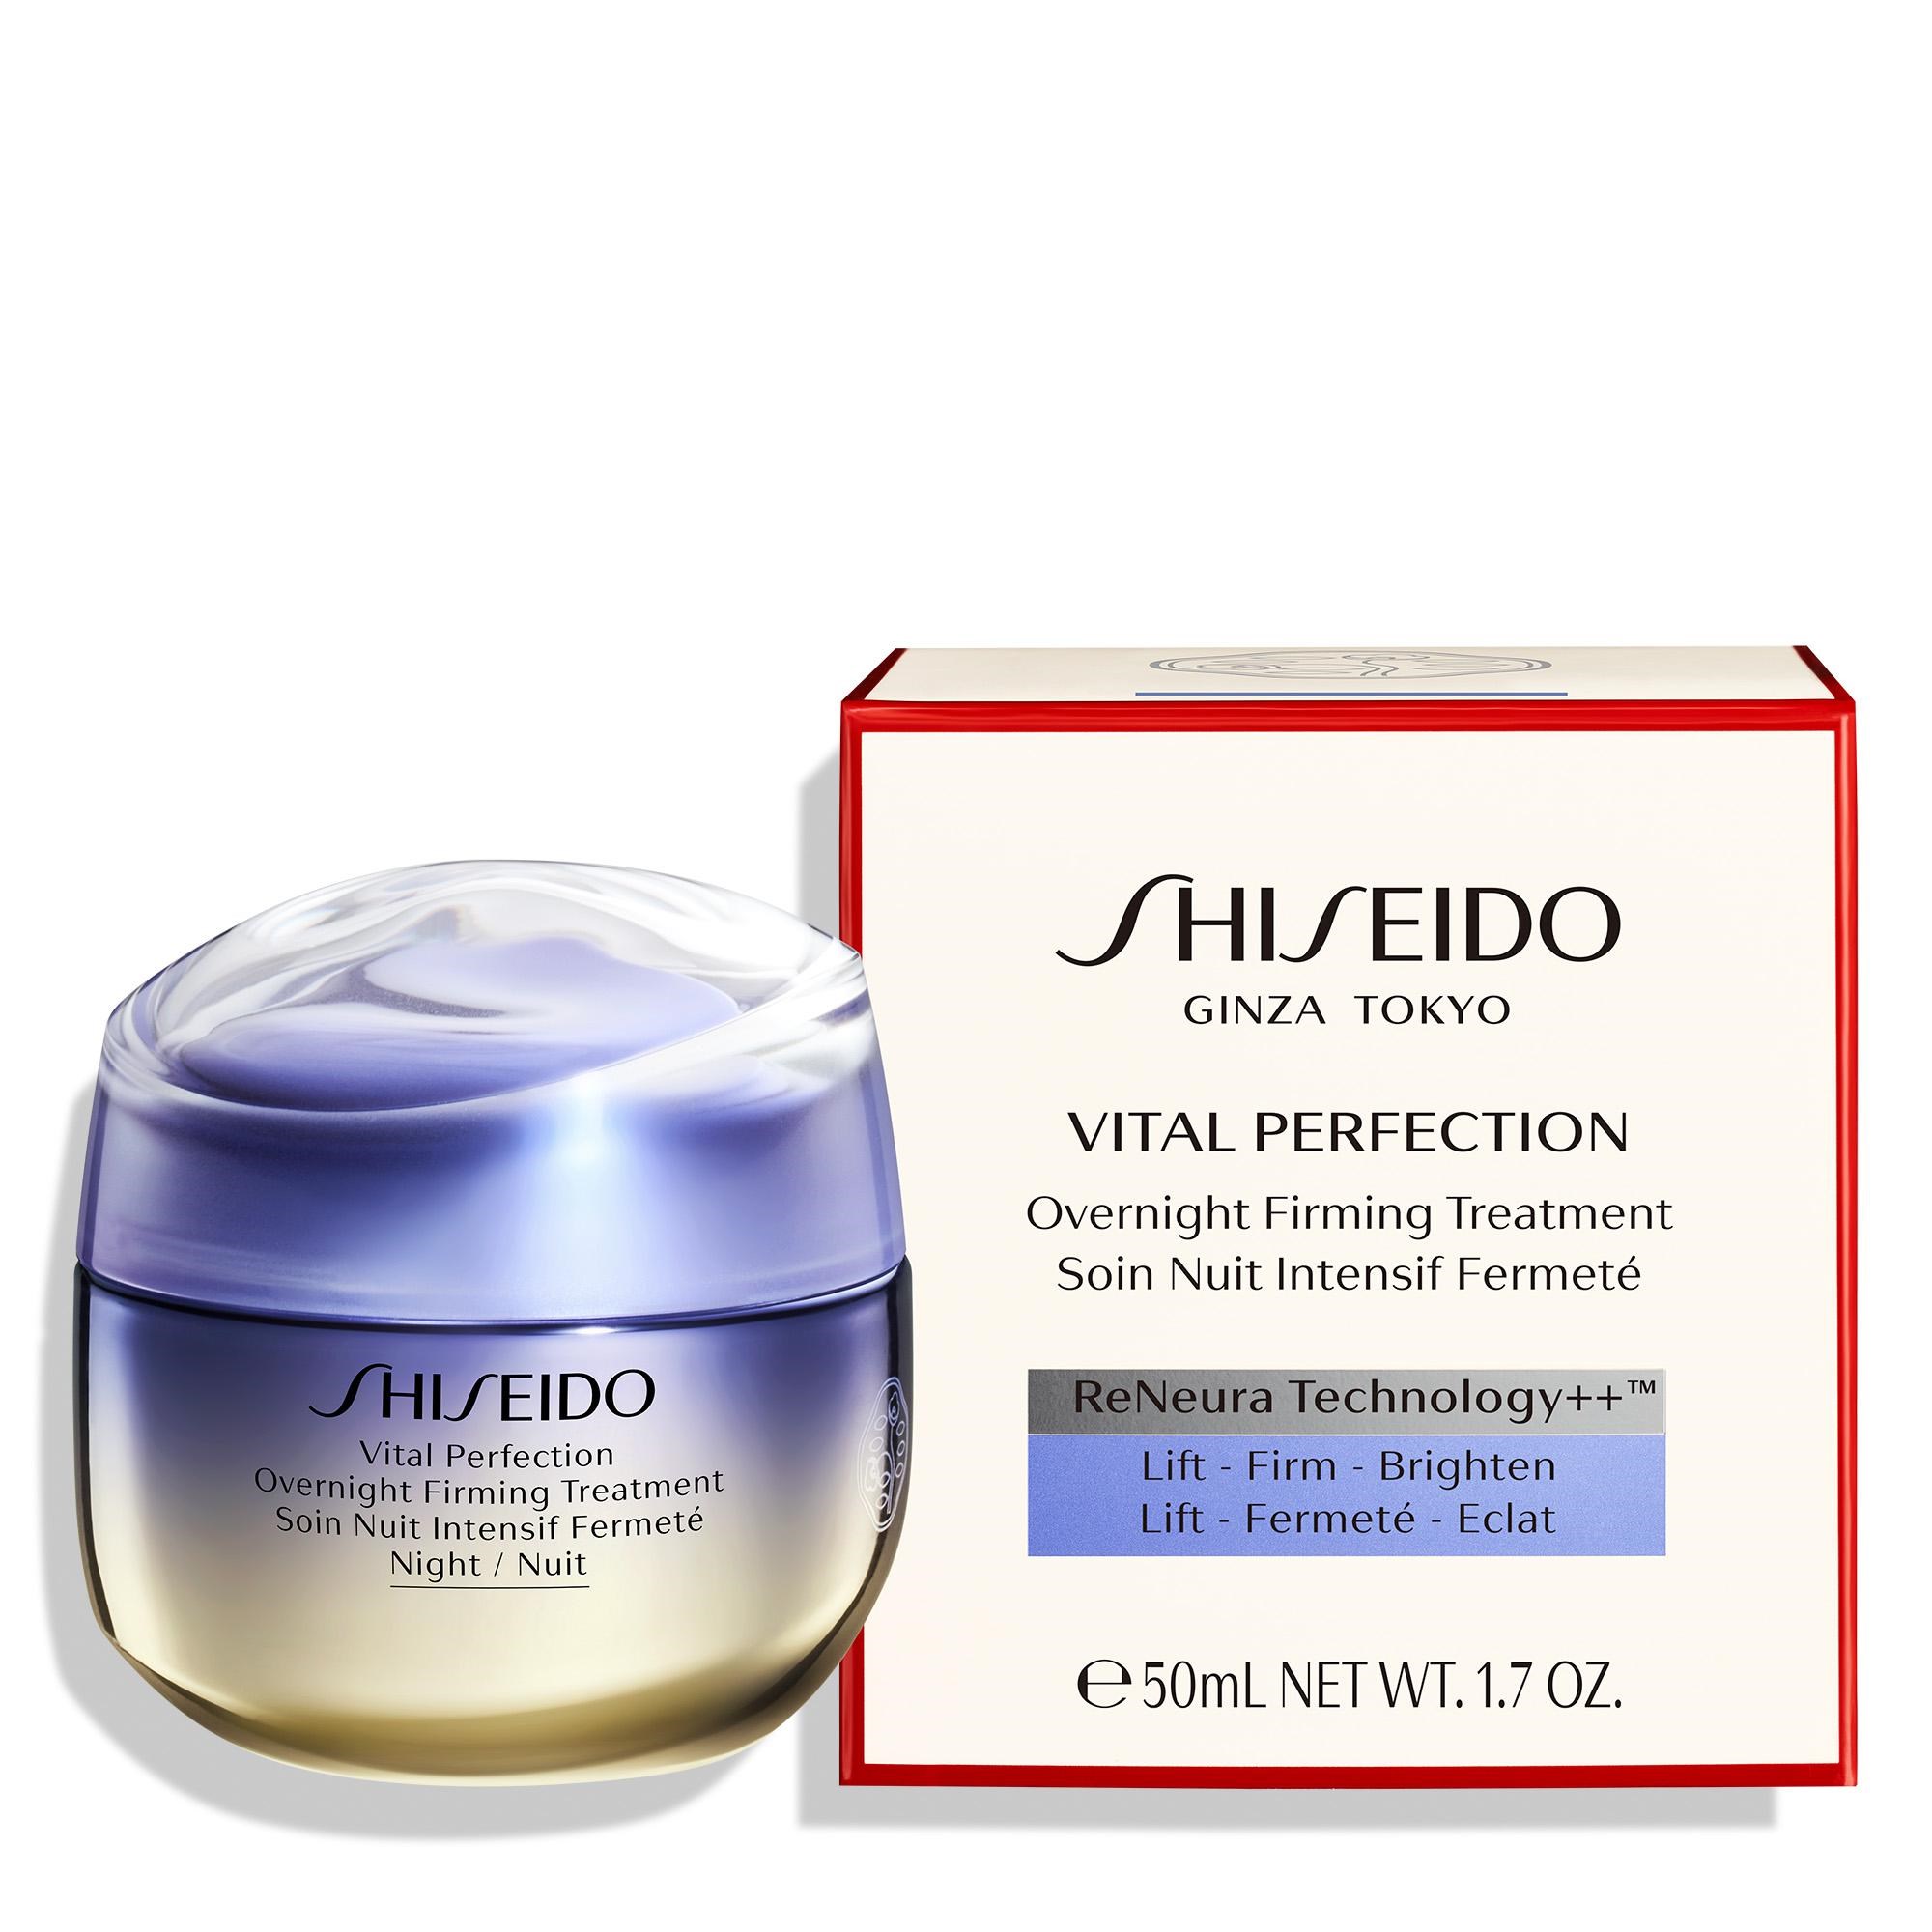 VITAL PERFECTION OVERNIGHT FIRMING TREATMENT 4